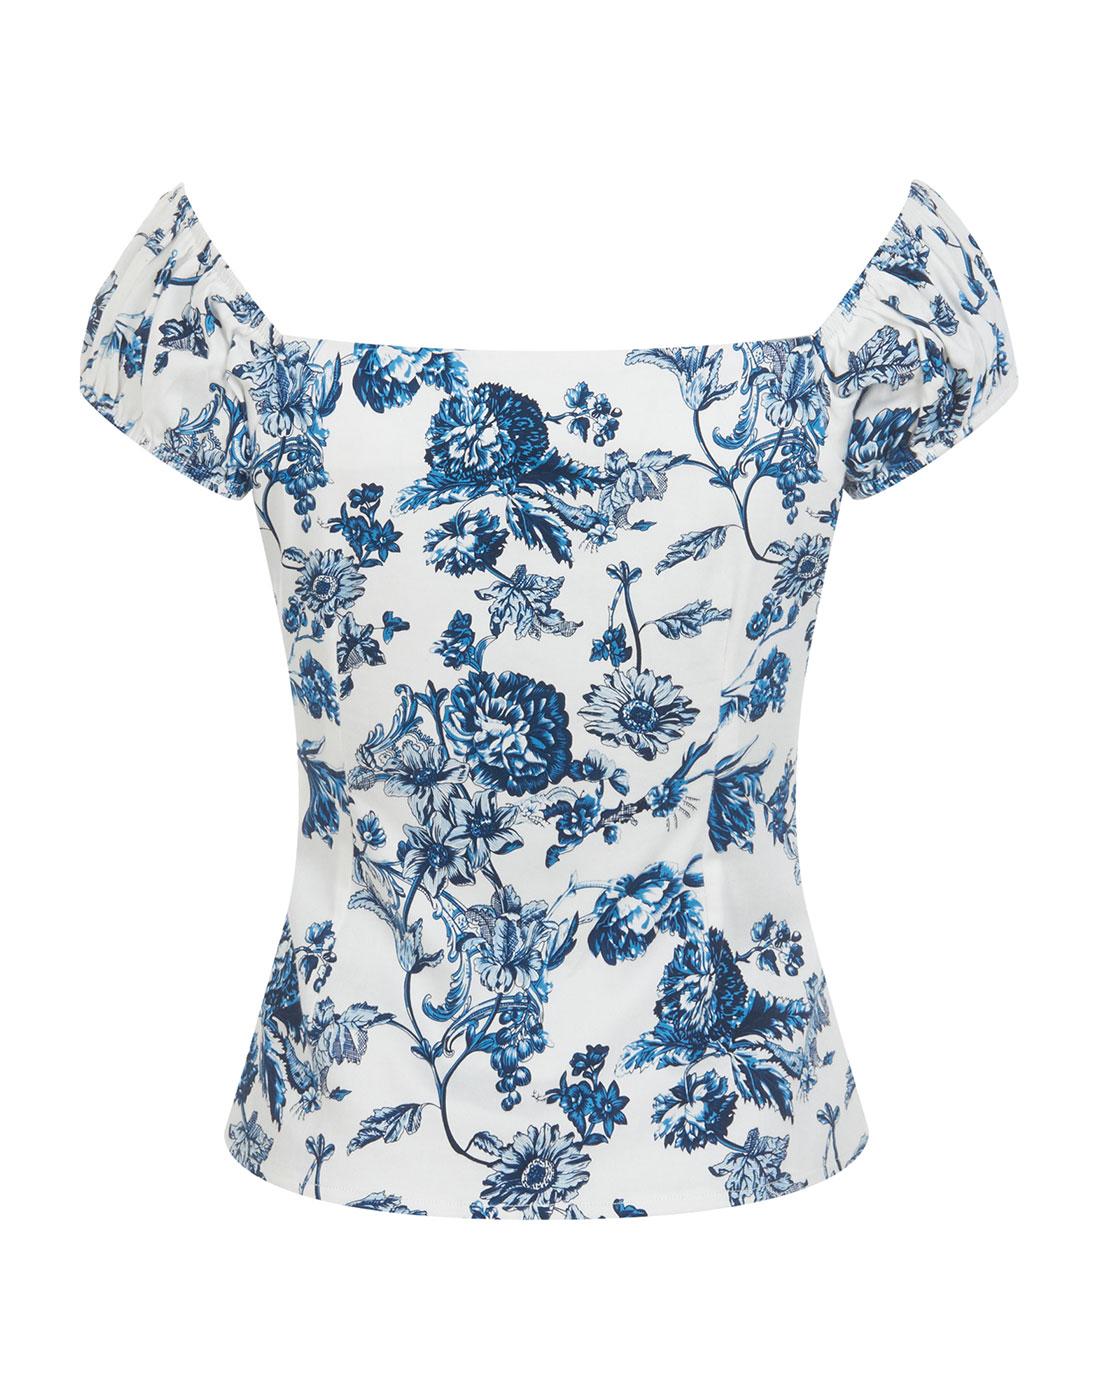 COLLECTIF Dolores Toile Retro 50s Floral Print Top in Blue